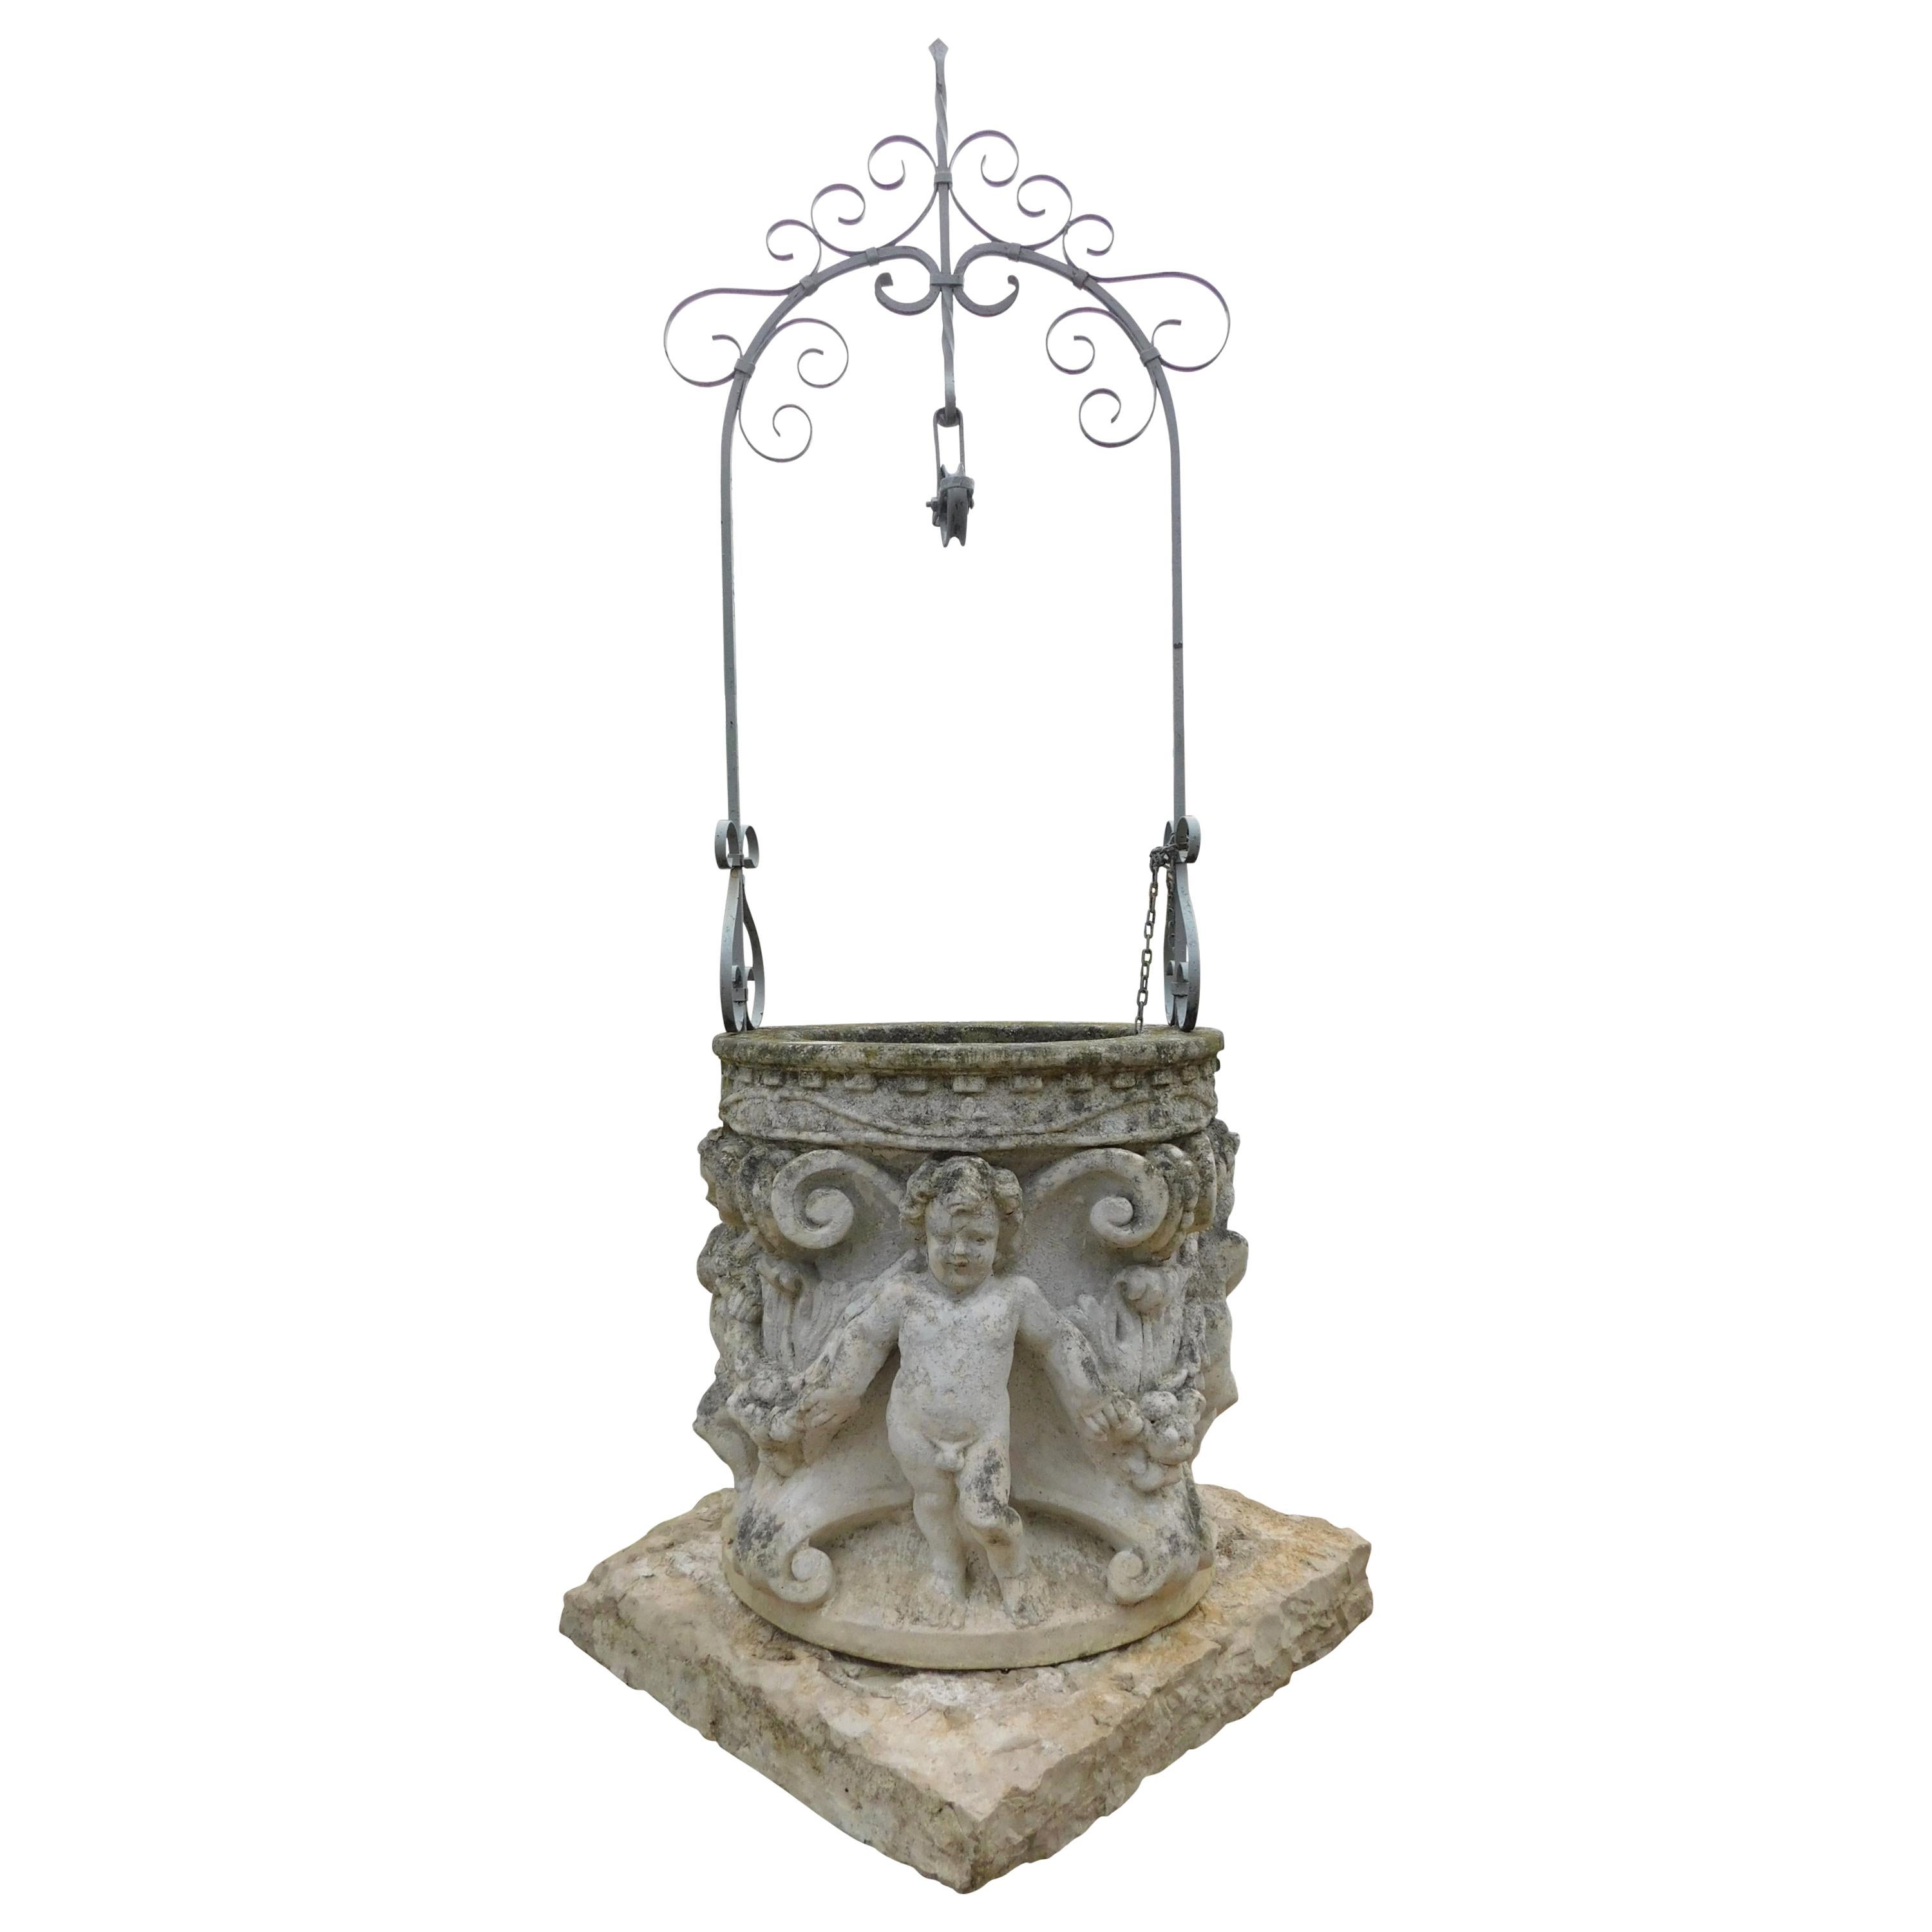 Antique Vicenza Stone Well with Sculptures of Cherubs and Festoons, 19th Century